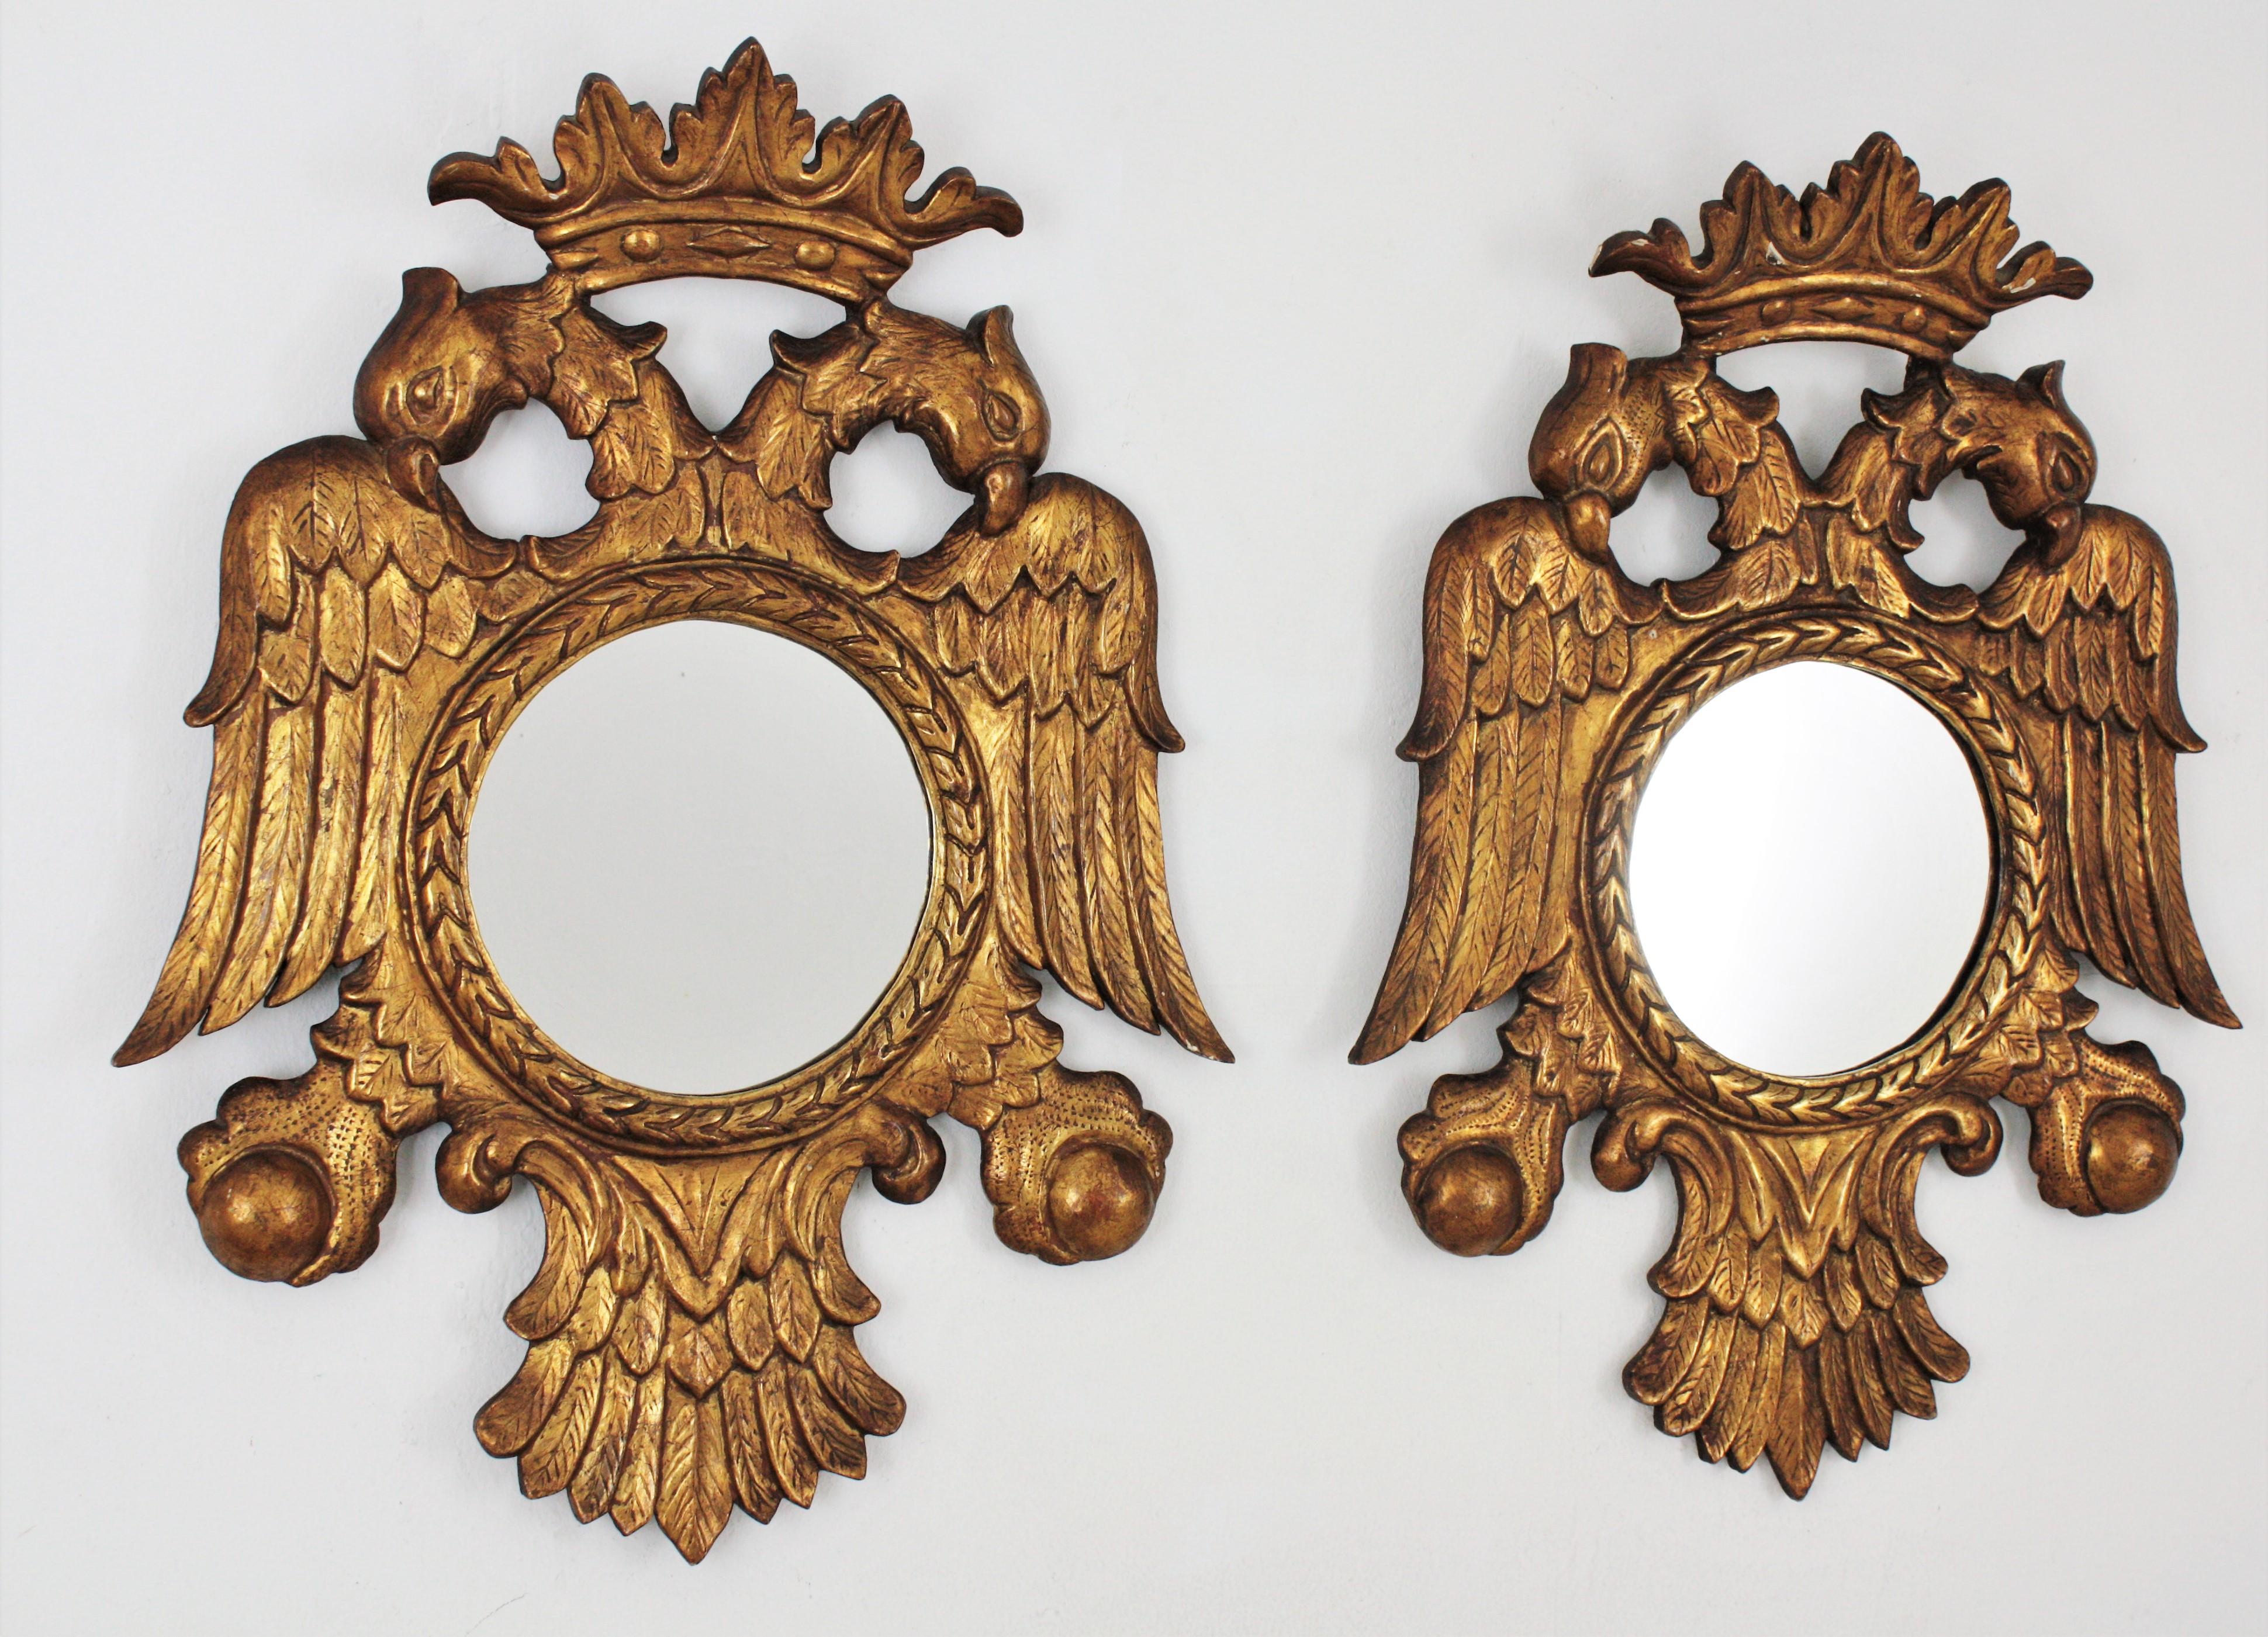 Pair of magnificent carved giltwood mirror frames in the form of a crowned bicephal eagle. Spain, 1890s
Highly decorative frames with double-headed eagles surmounted by a crown, symmetric wings and tails holding the central circular mirror and the